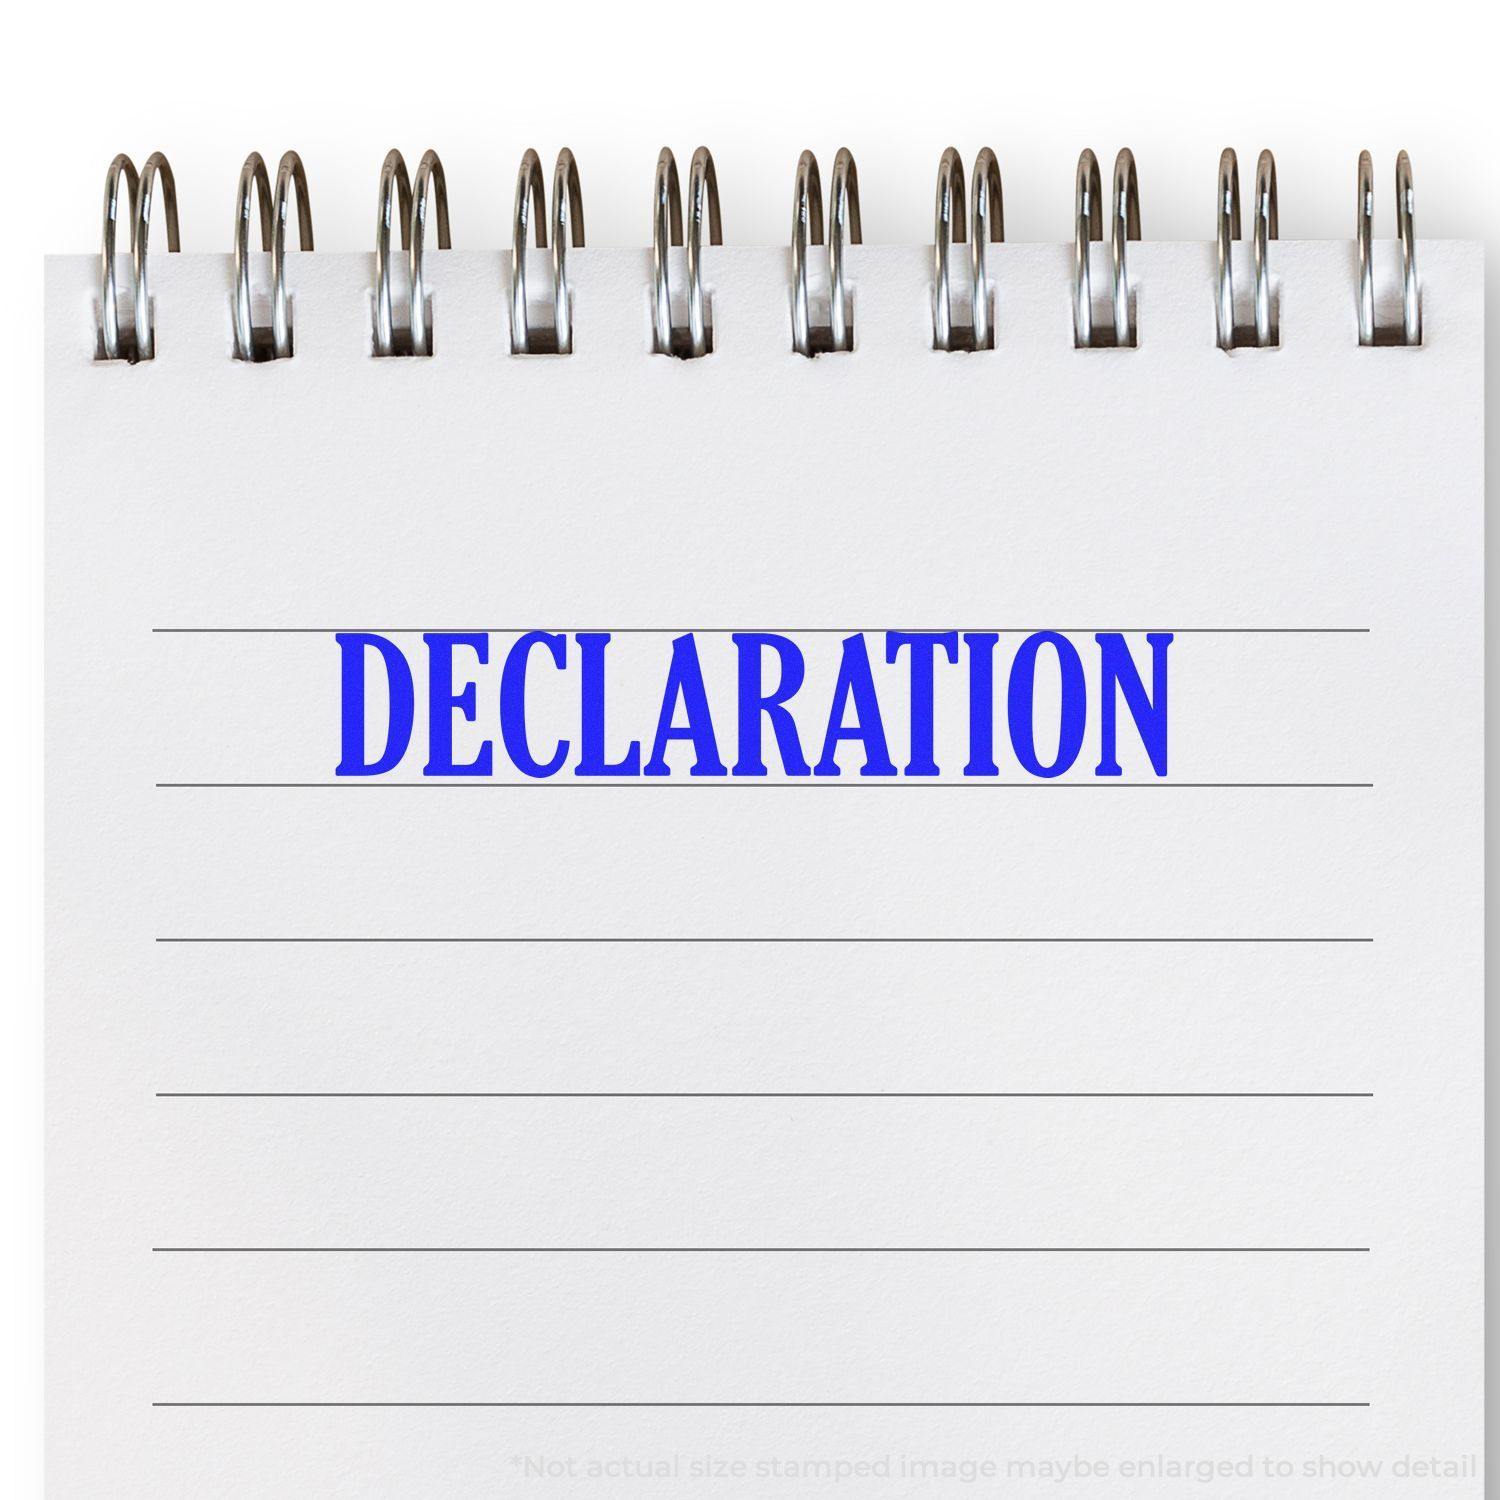 A self-inking stamp with a stamped image showing how the text "DECLARATION" is displayed after stamping.